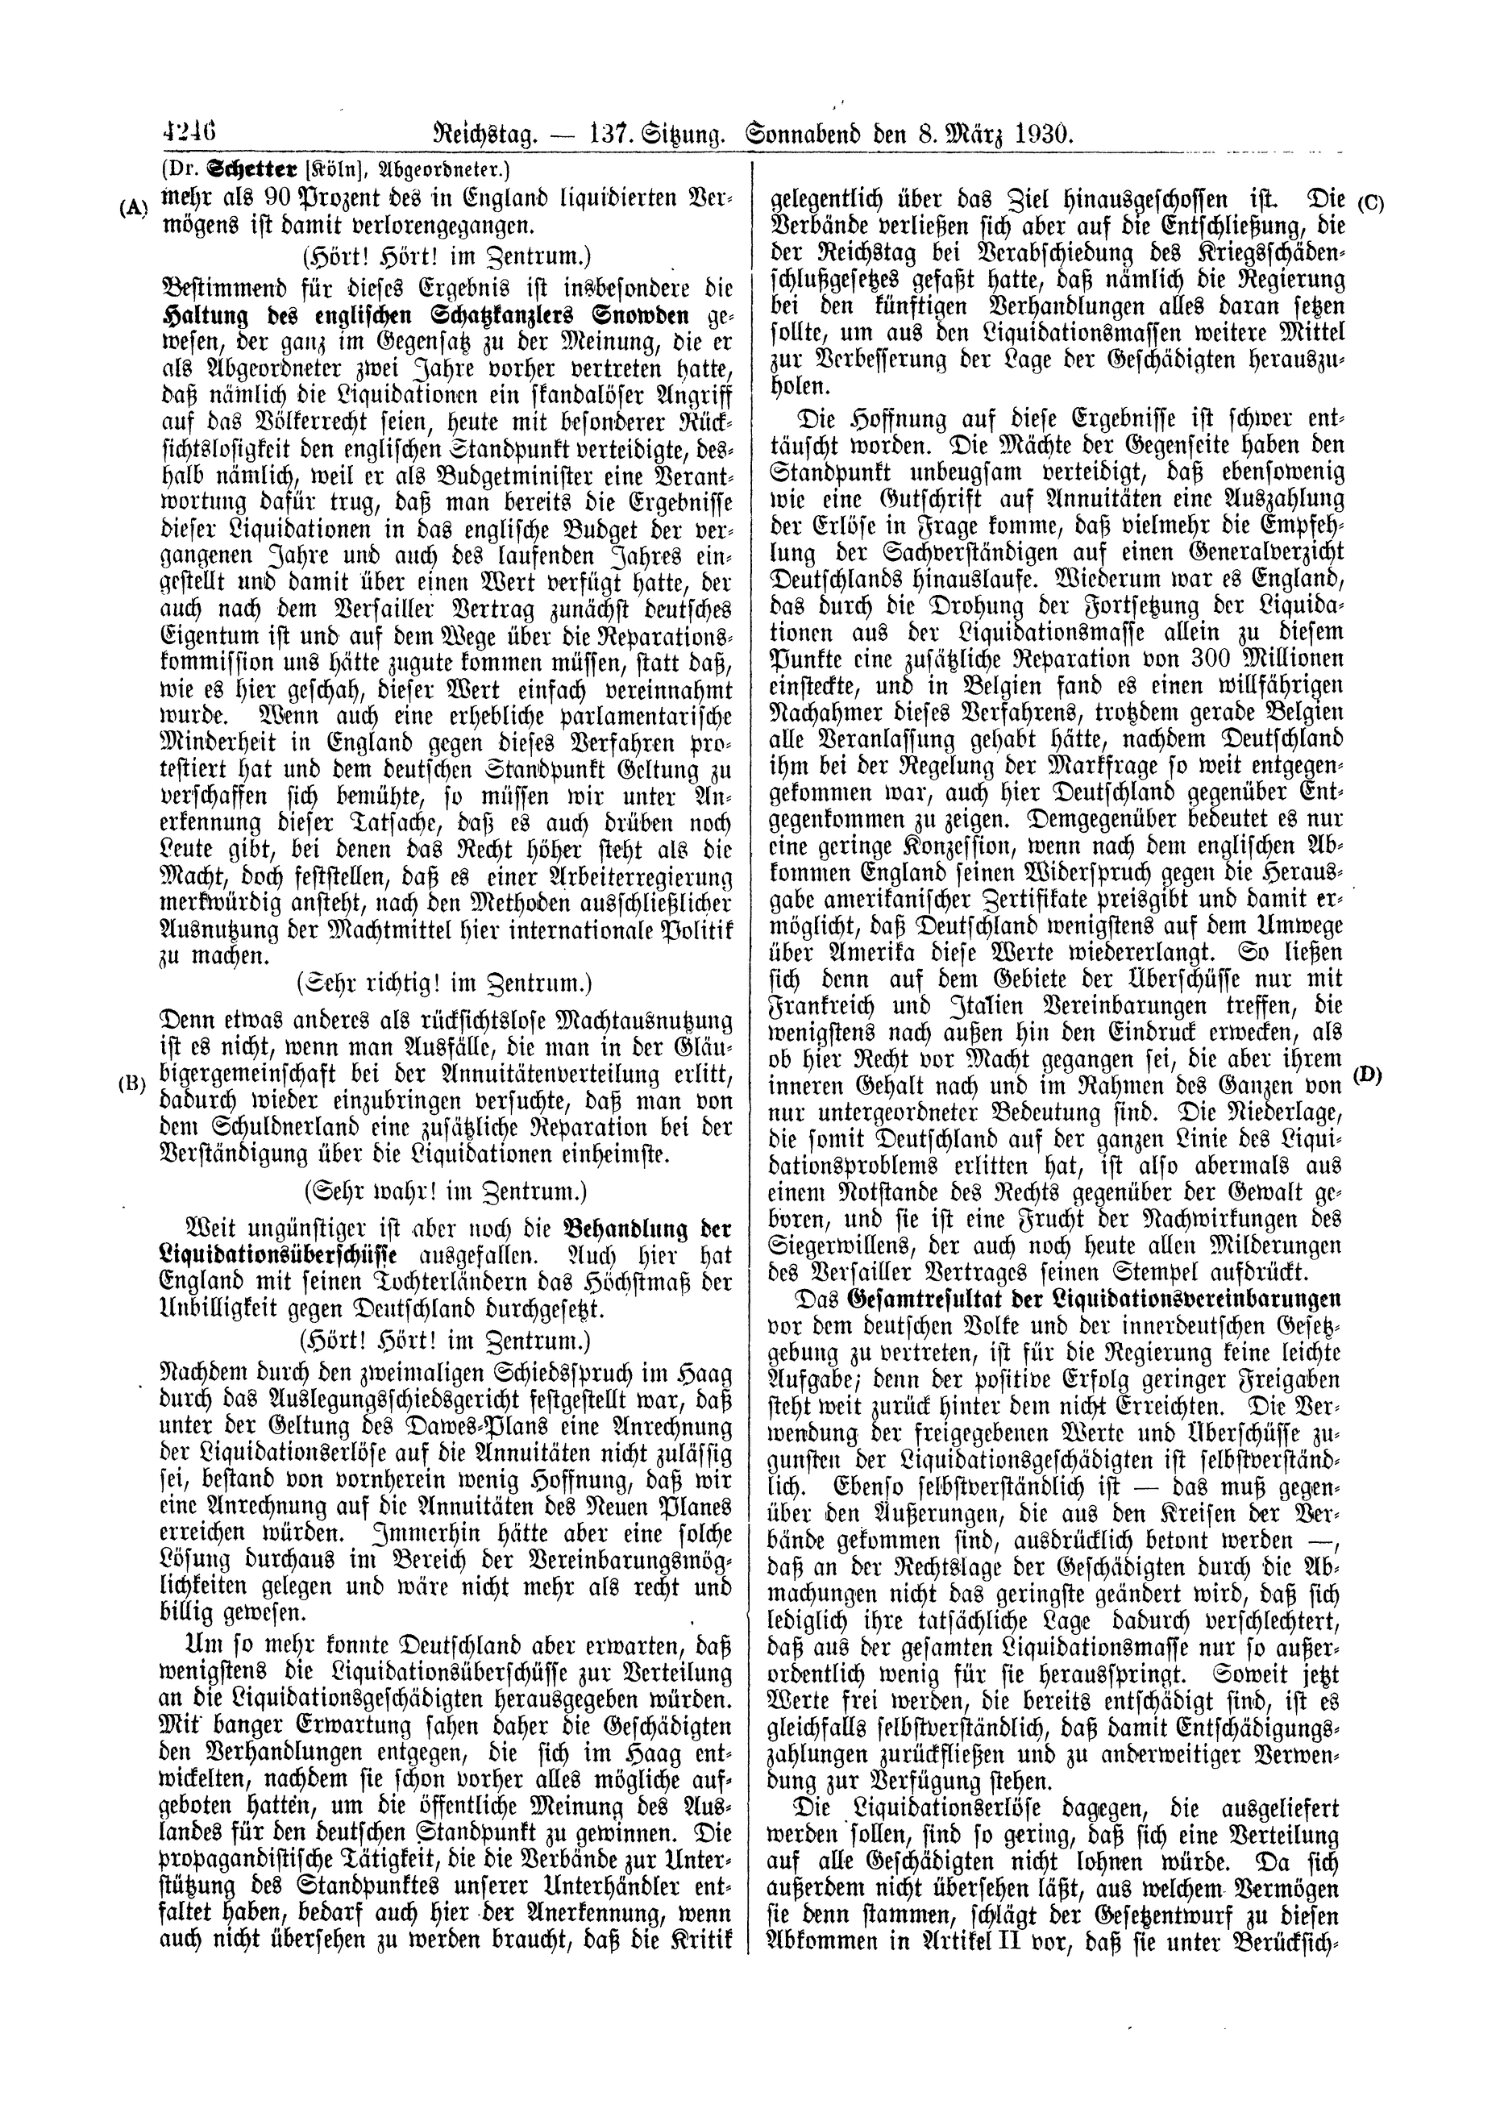 Scan of page 4246